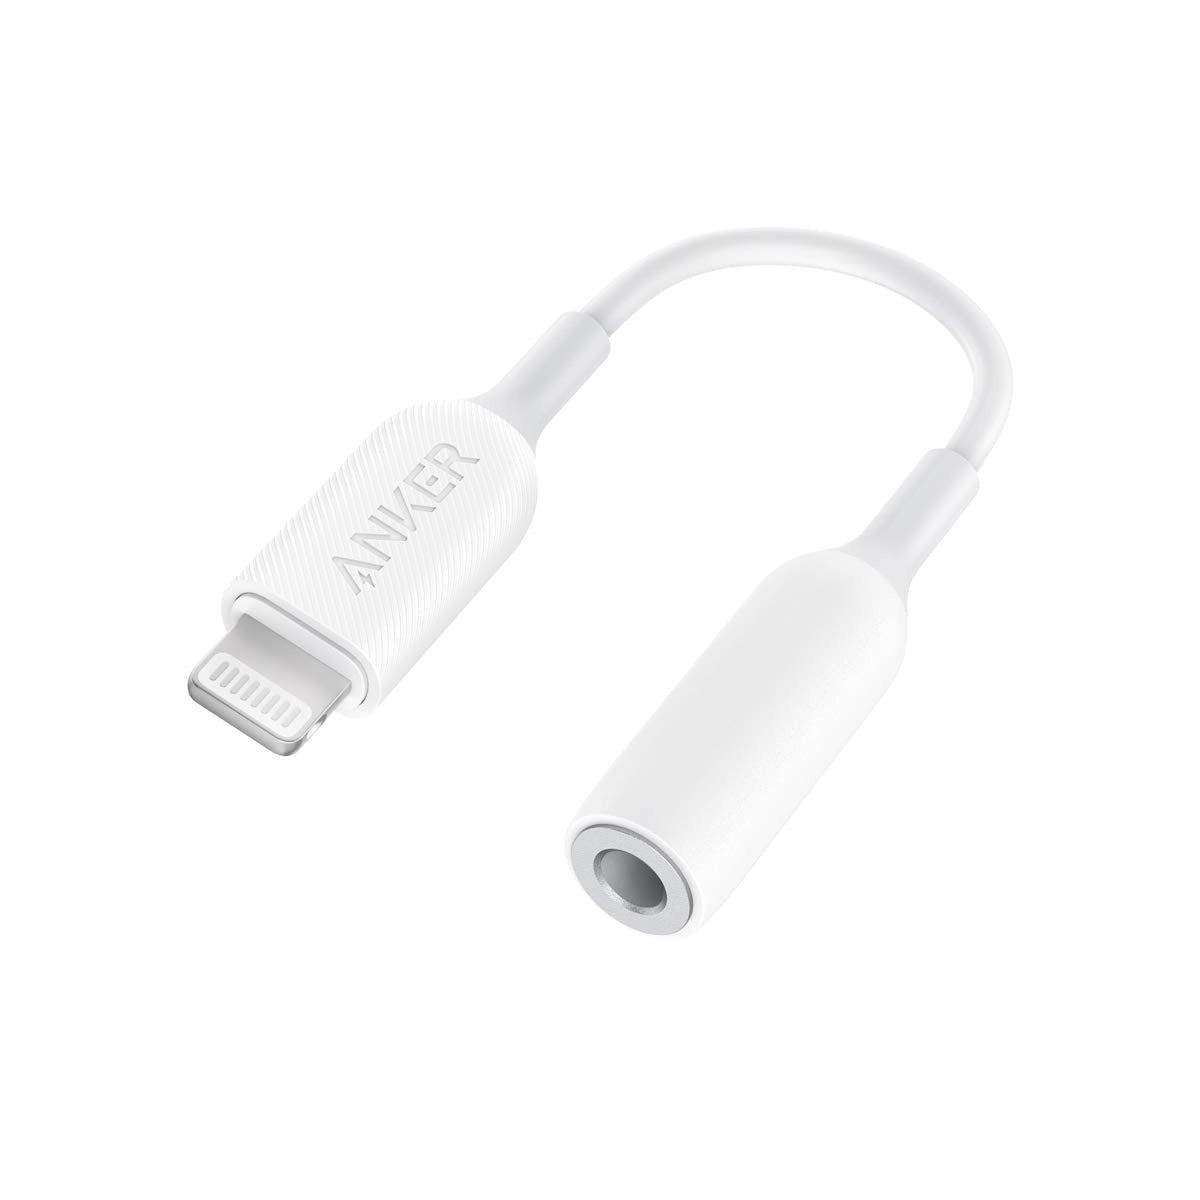 Anker 3.5mm Audio Adapter with Lightning Connector, MFi Certified Supports Volume Control Mic for Headphones, Earphones, Earbuds, and More - White